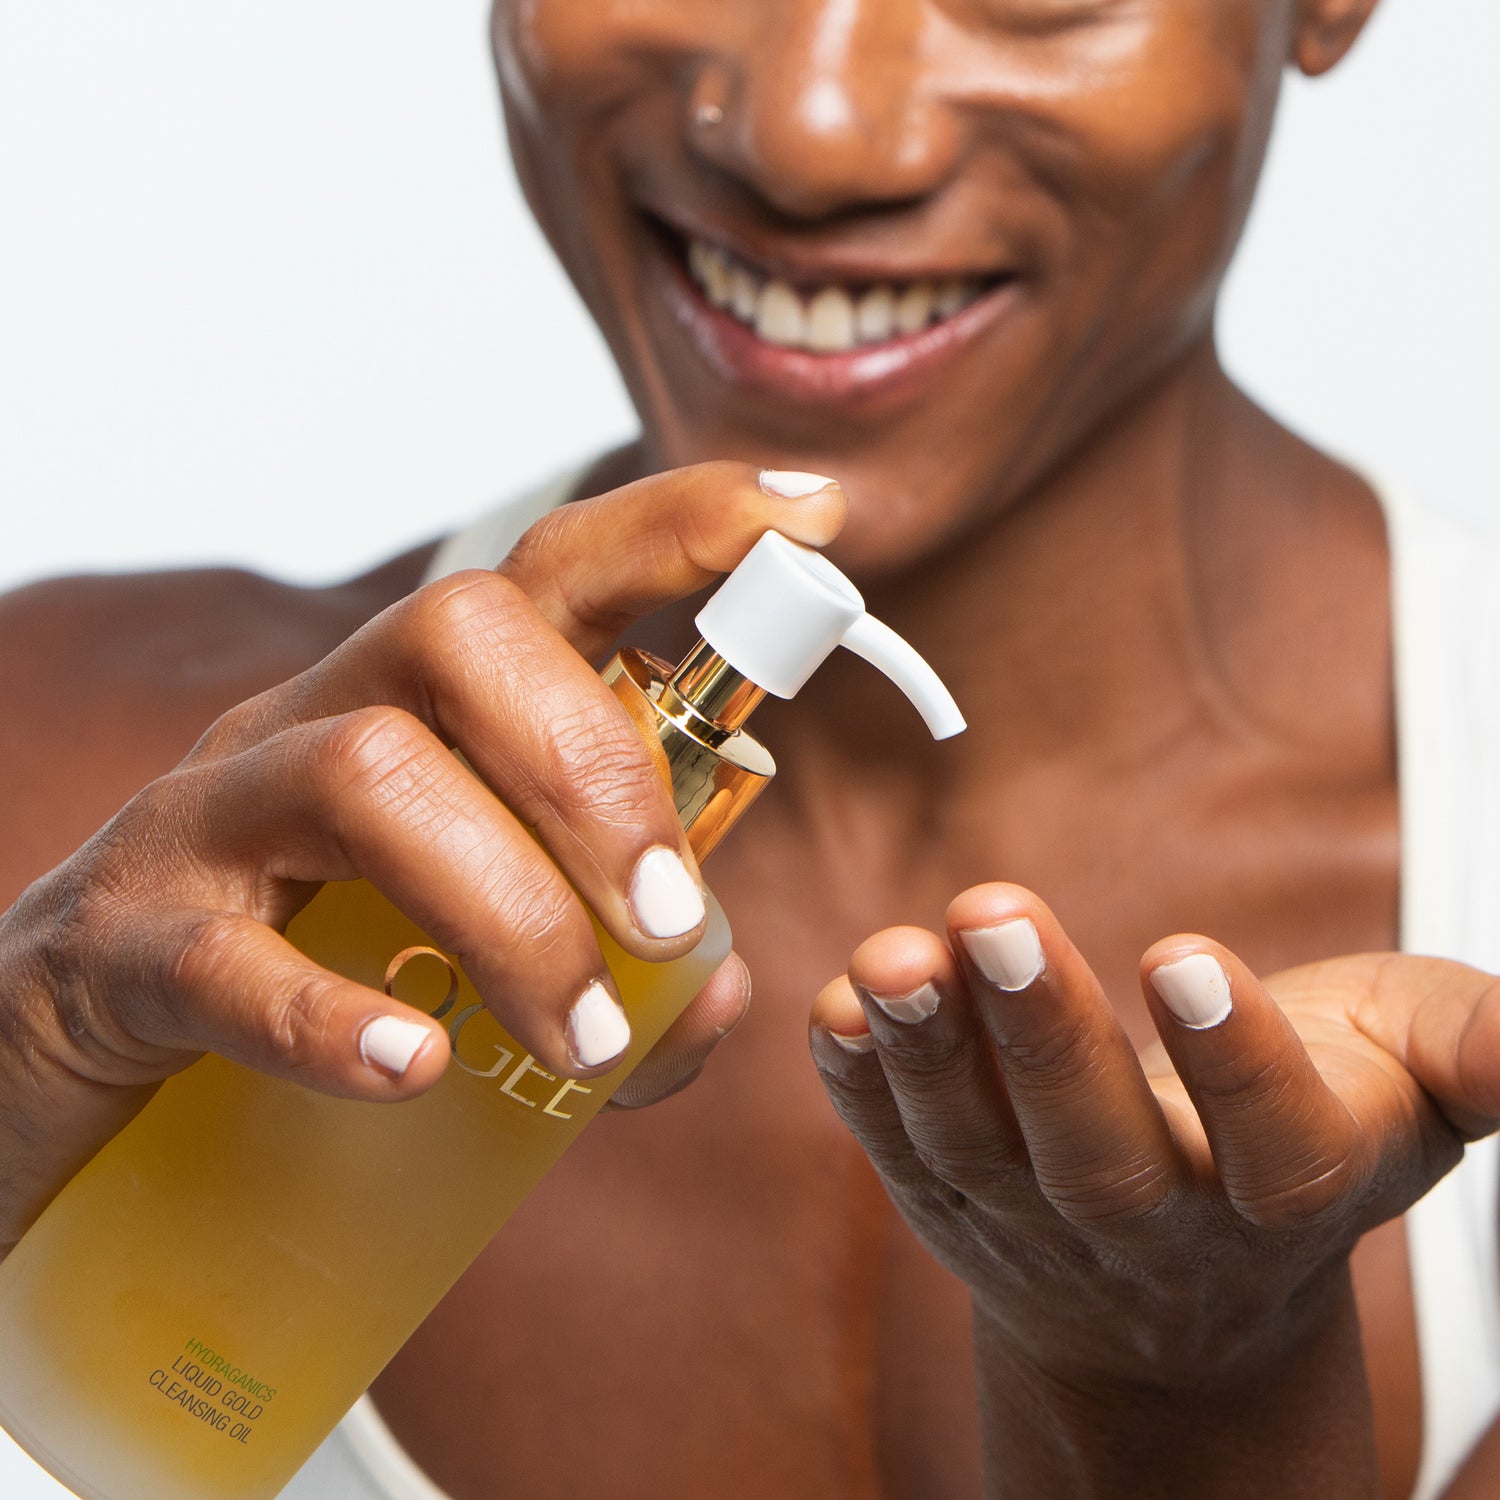 Ogee Liquid Gold Cleansing Oil